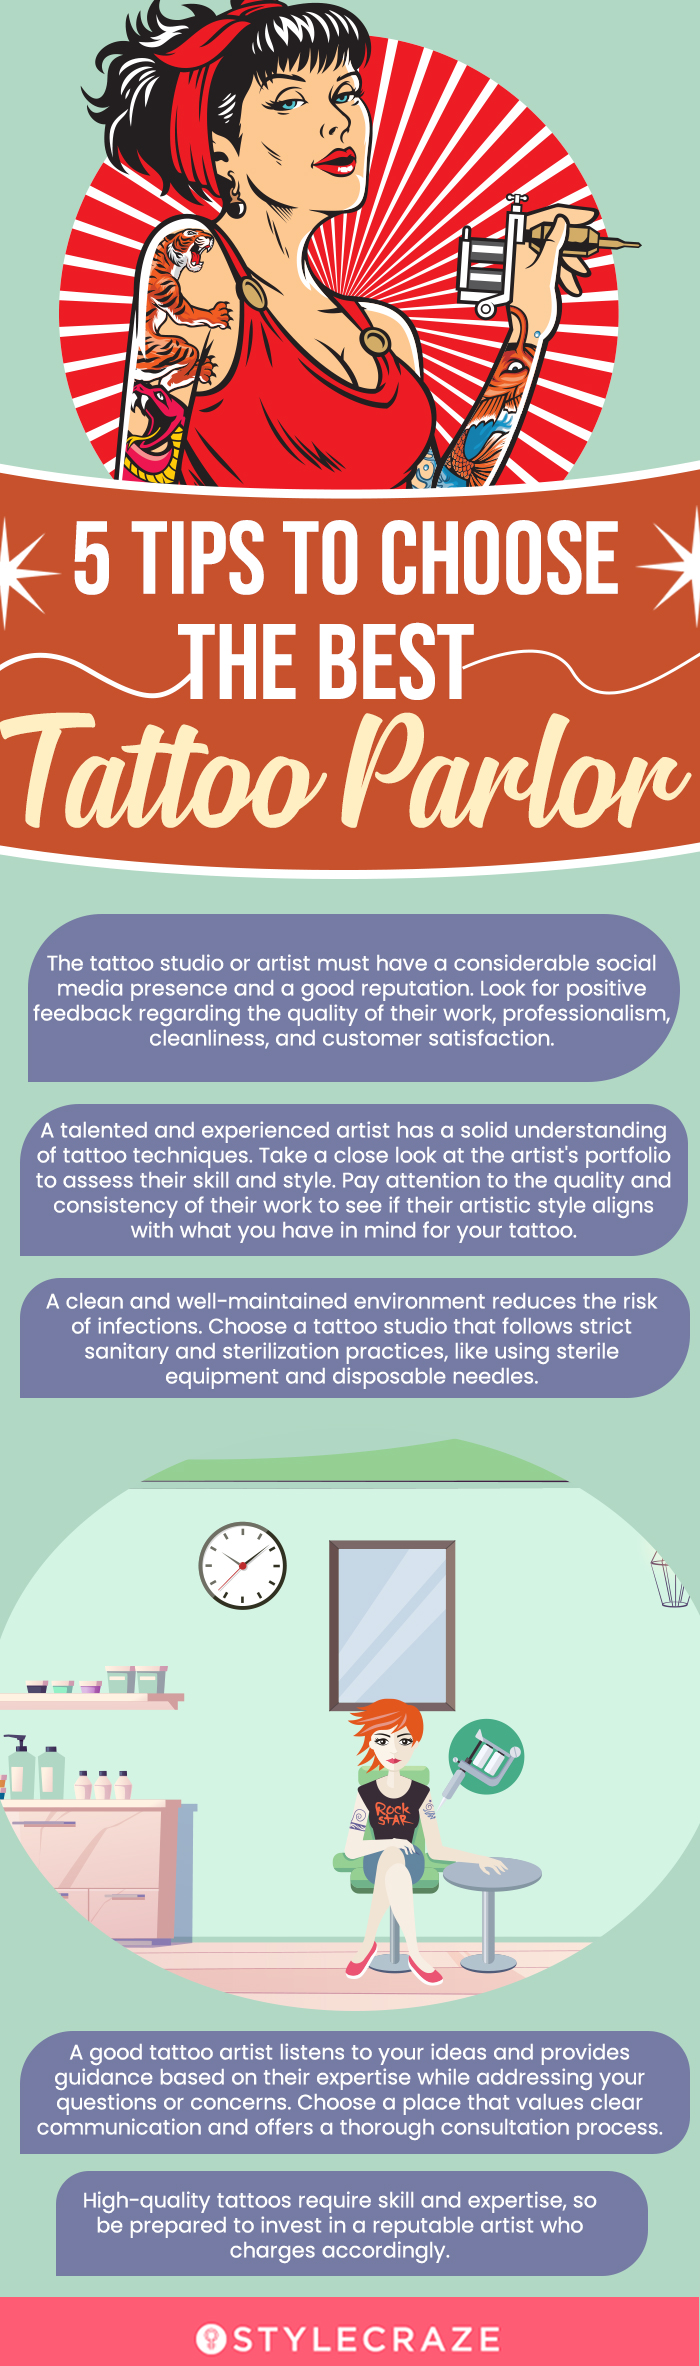 5 tips to choose the best tattoo parlor (infographic)